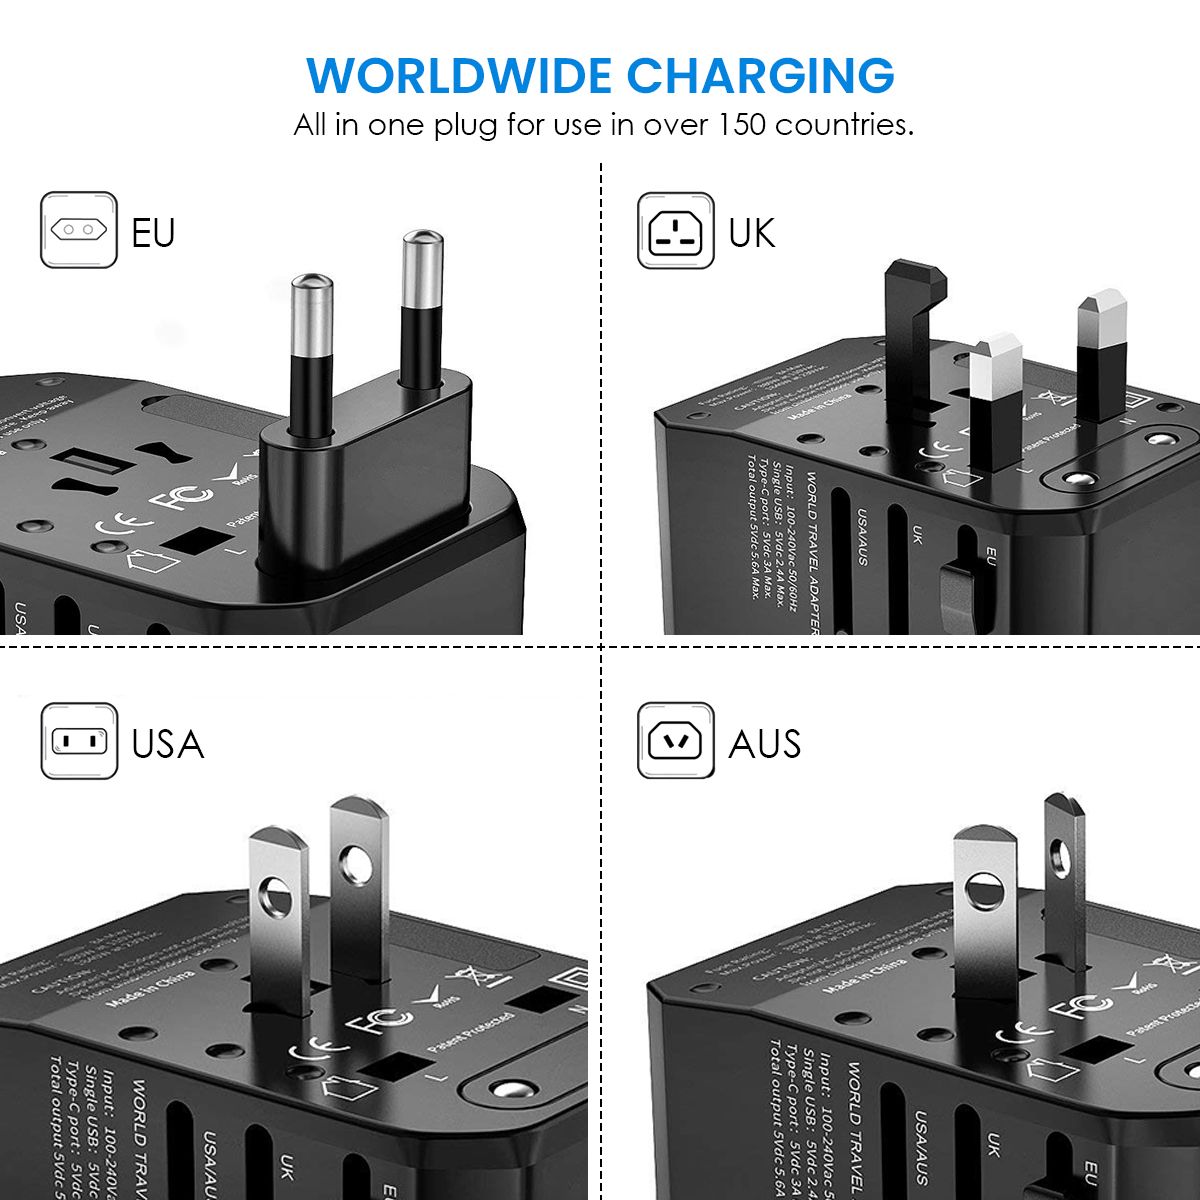 Bakeey-4-USB-PD-Type-C-Travel-Wall-USB-Charger-Adapater-EU-UK-US-AU-For-Phone-Tablet-Camera-1359649